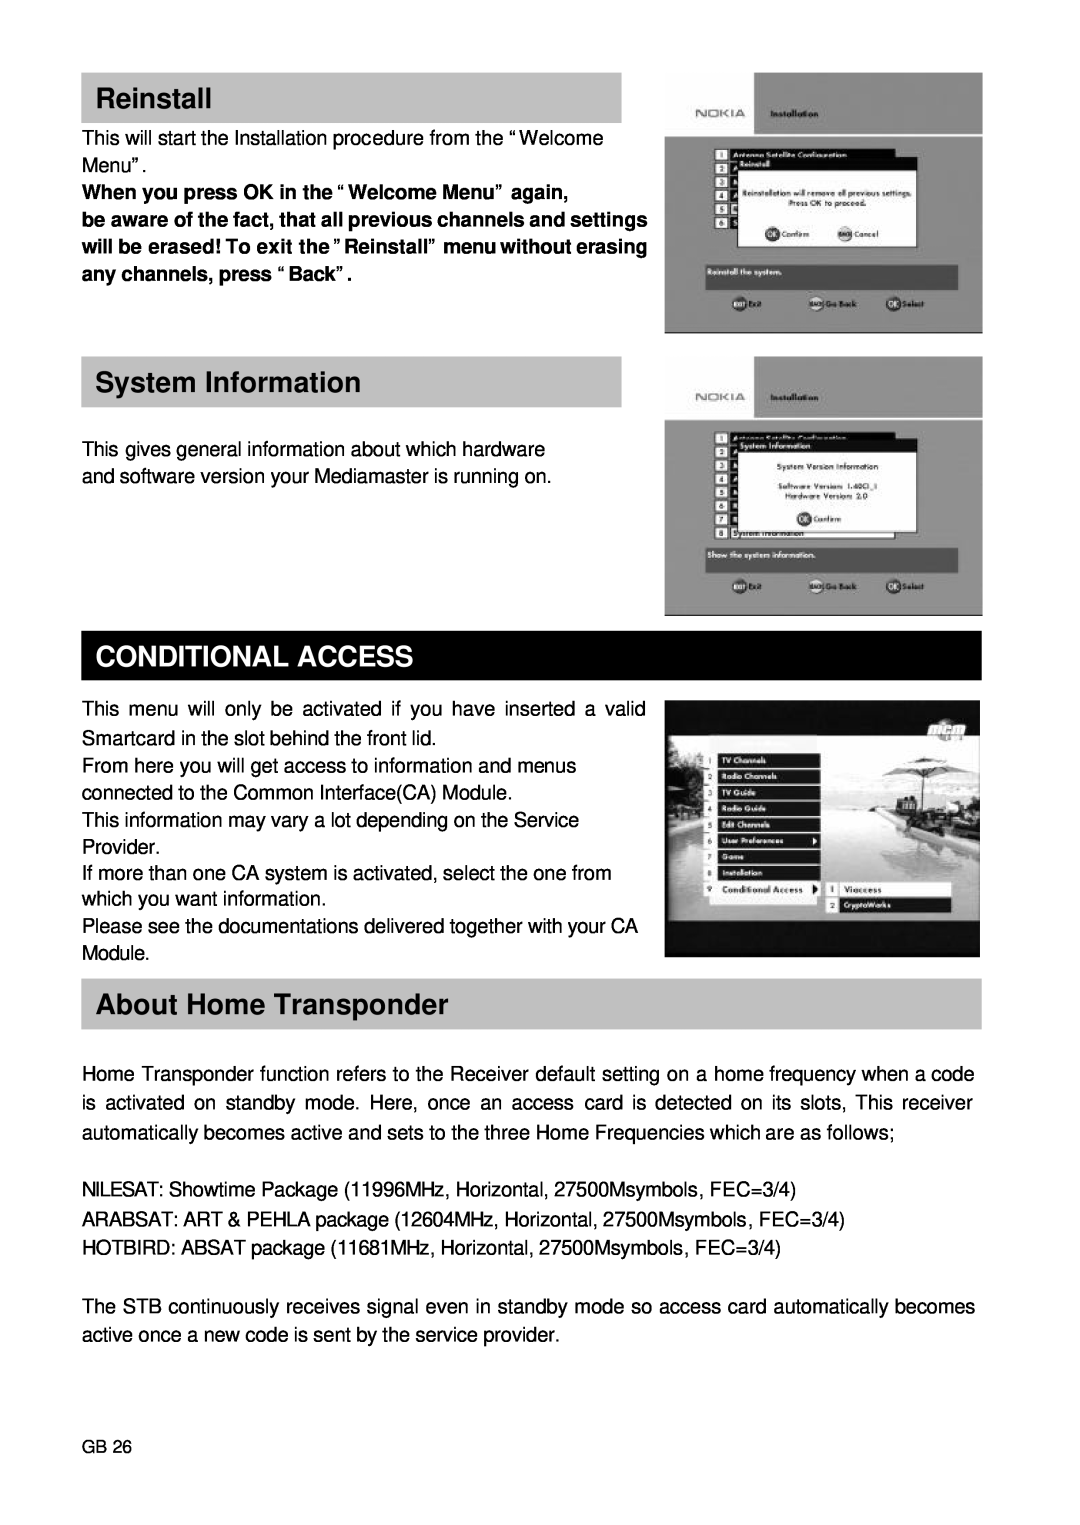 Nokia 9660S owner manual Reinstall, System Information, Conditional Access, About Home Transponder 